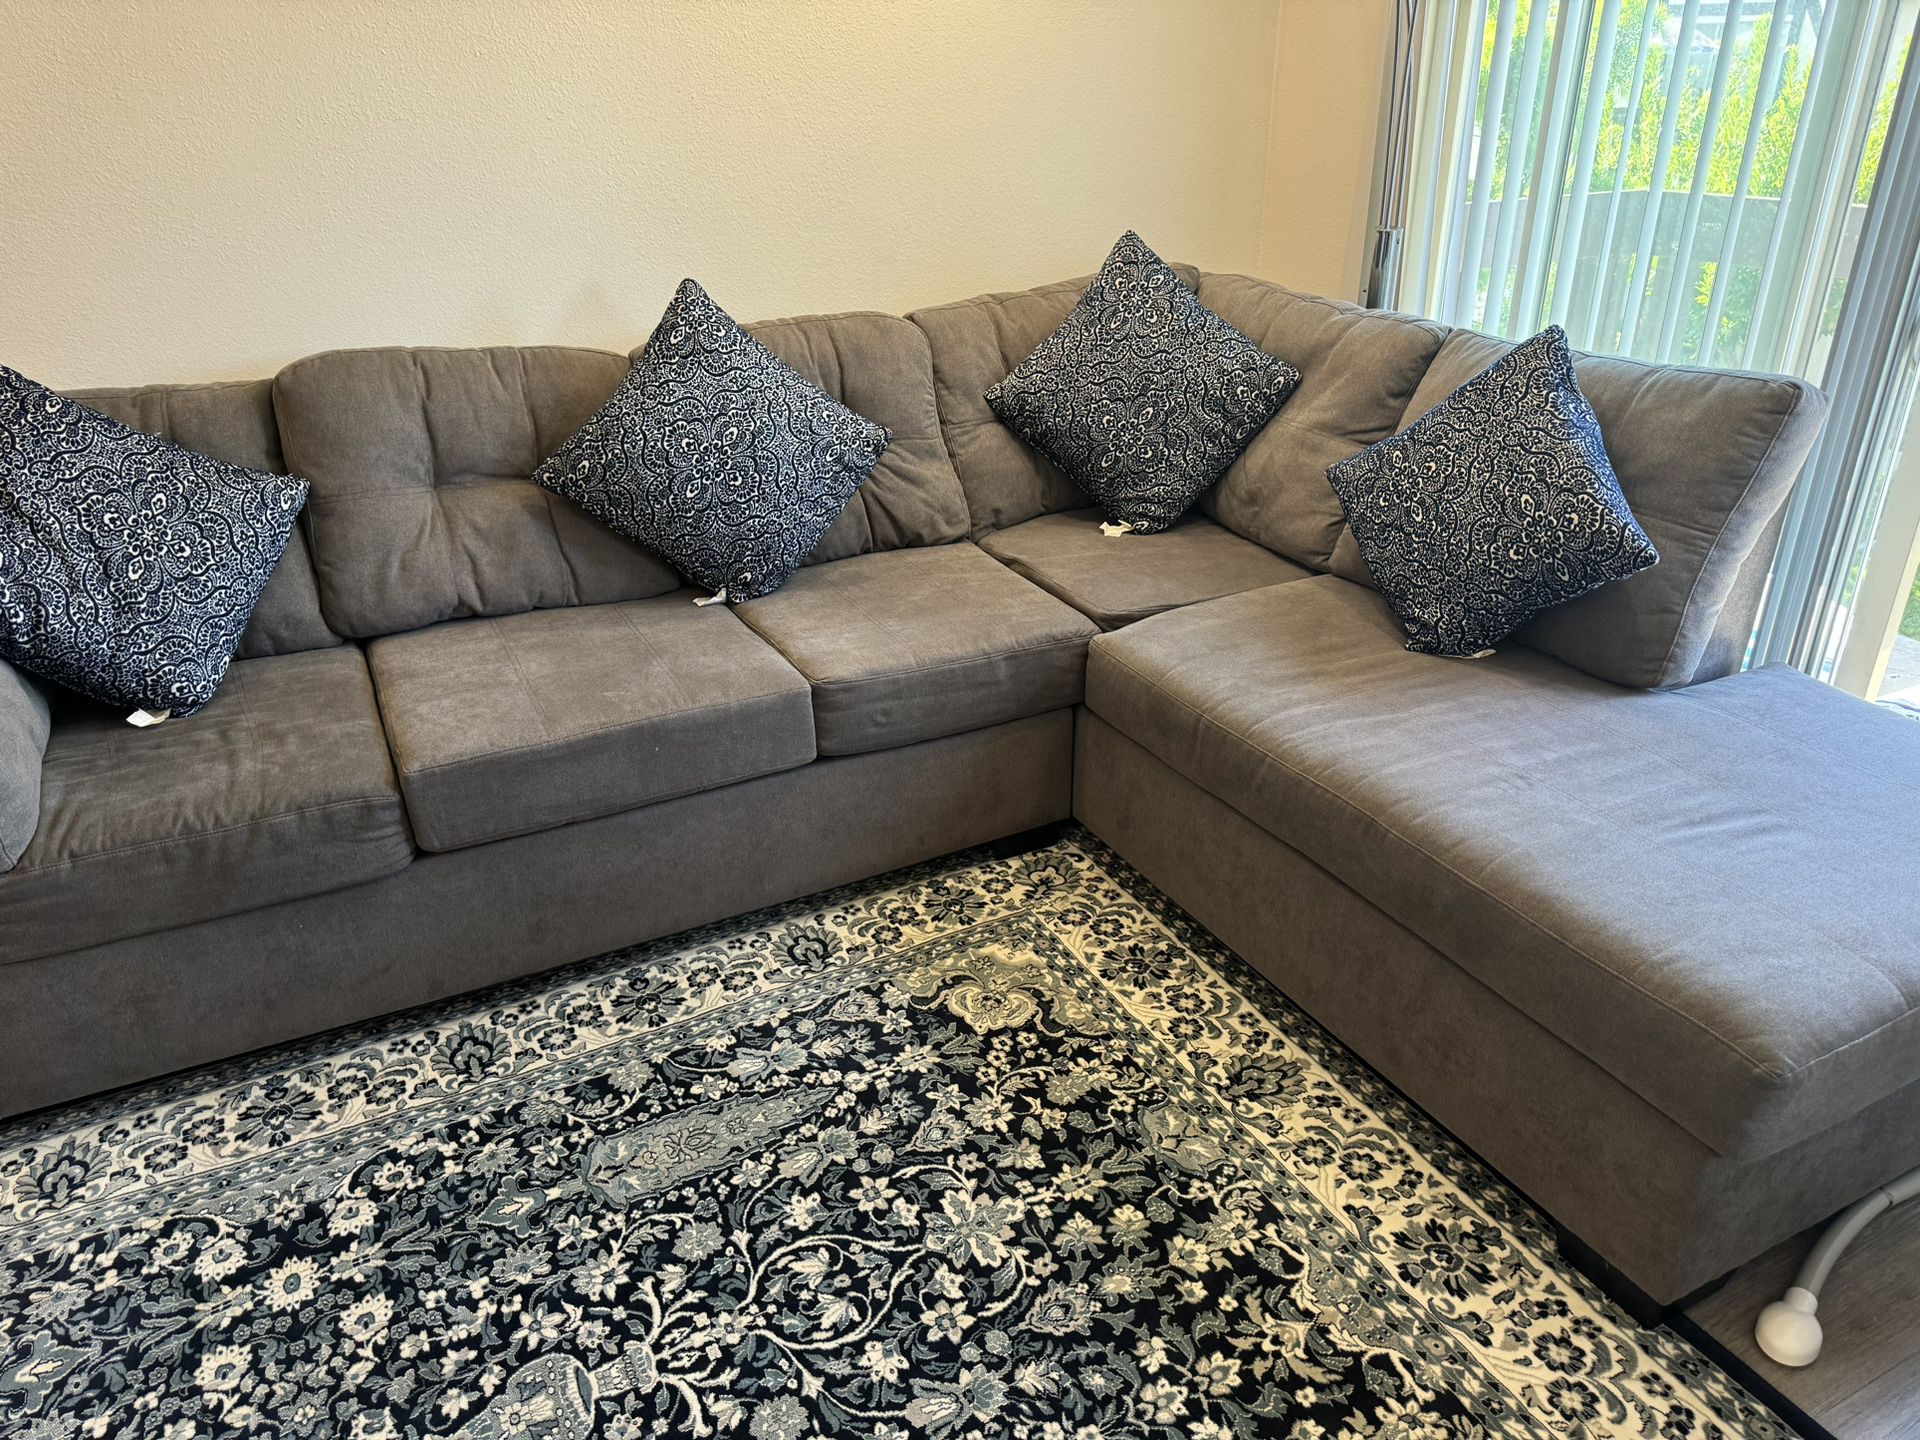 Sofa Chaise Sectional 